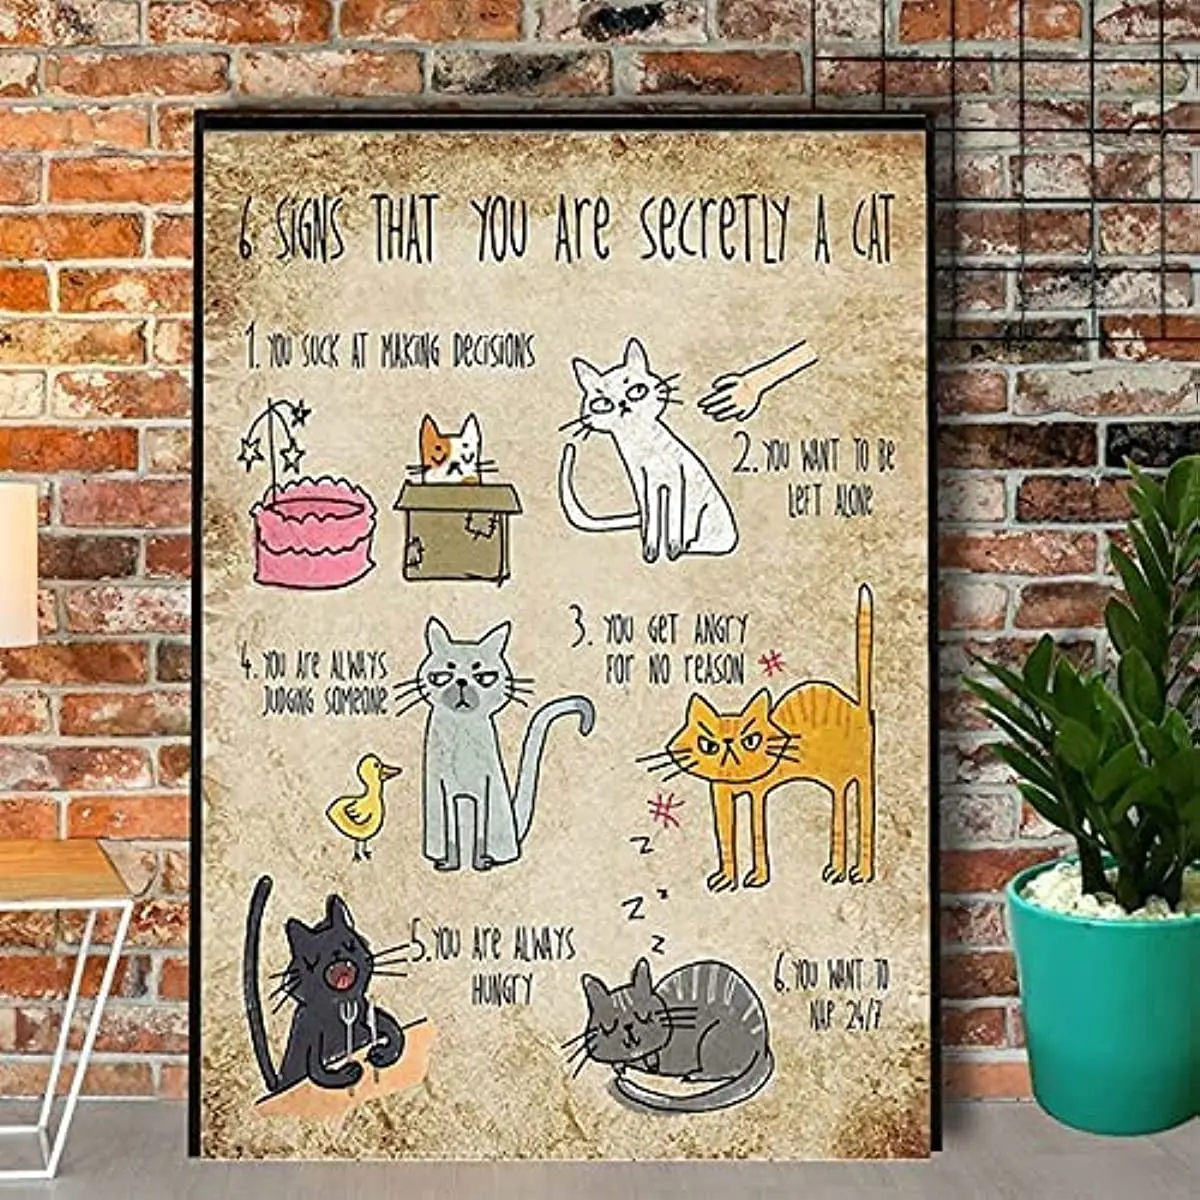 

Funny Metal Sign Cat Six Signs That You are Secretly A Cat Bathroom Bedroom Cafe Wall Decoration Man Cave Best Gift for Father's